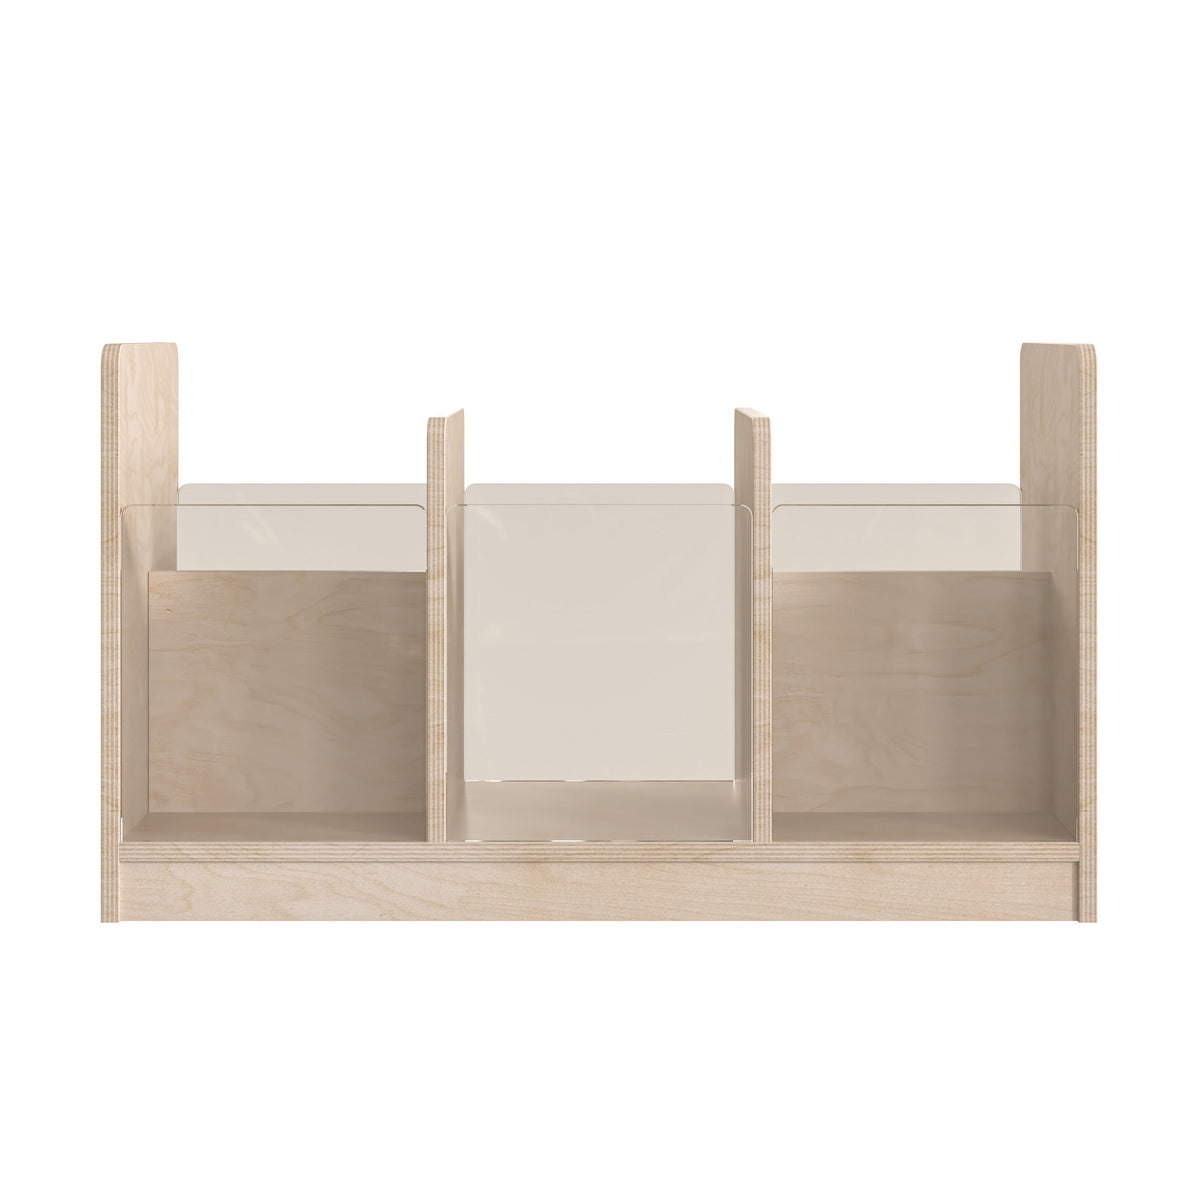 Commercial Grade Natural Finish 2 Sided Storage Unit with Transparent Sides